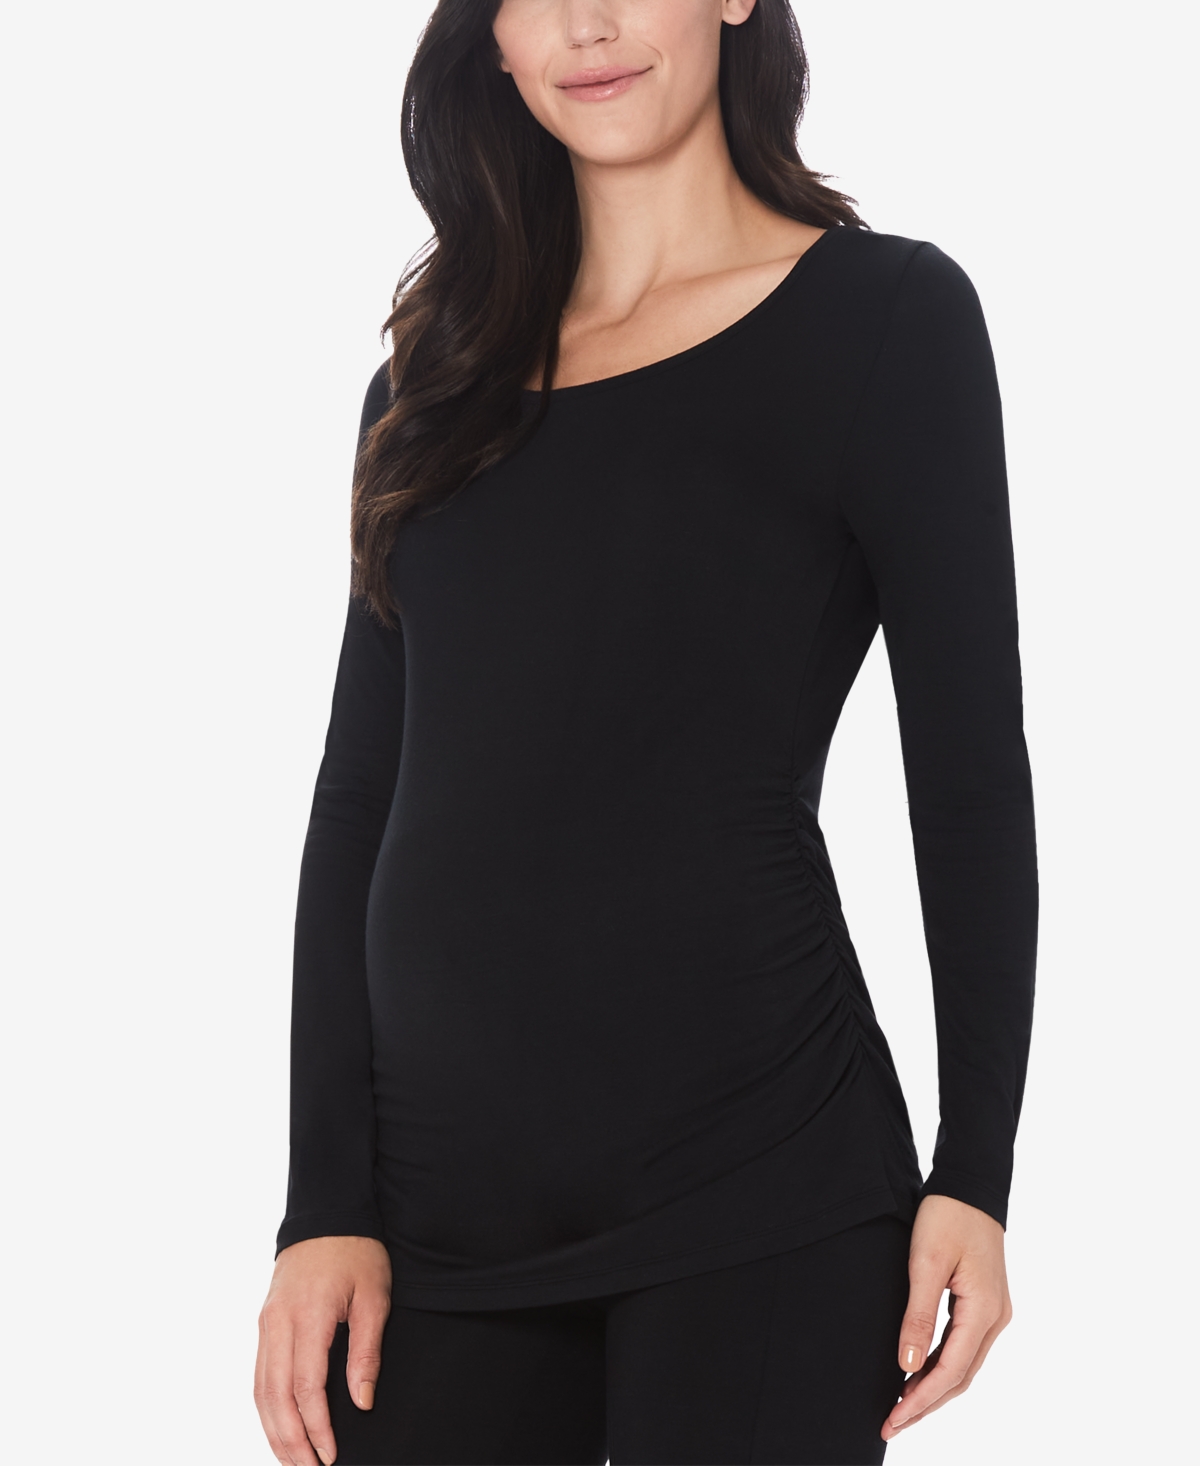 Cuddl Duds Women's Softwear with Stretch Long Sleeve V Neck Top